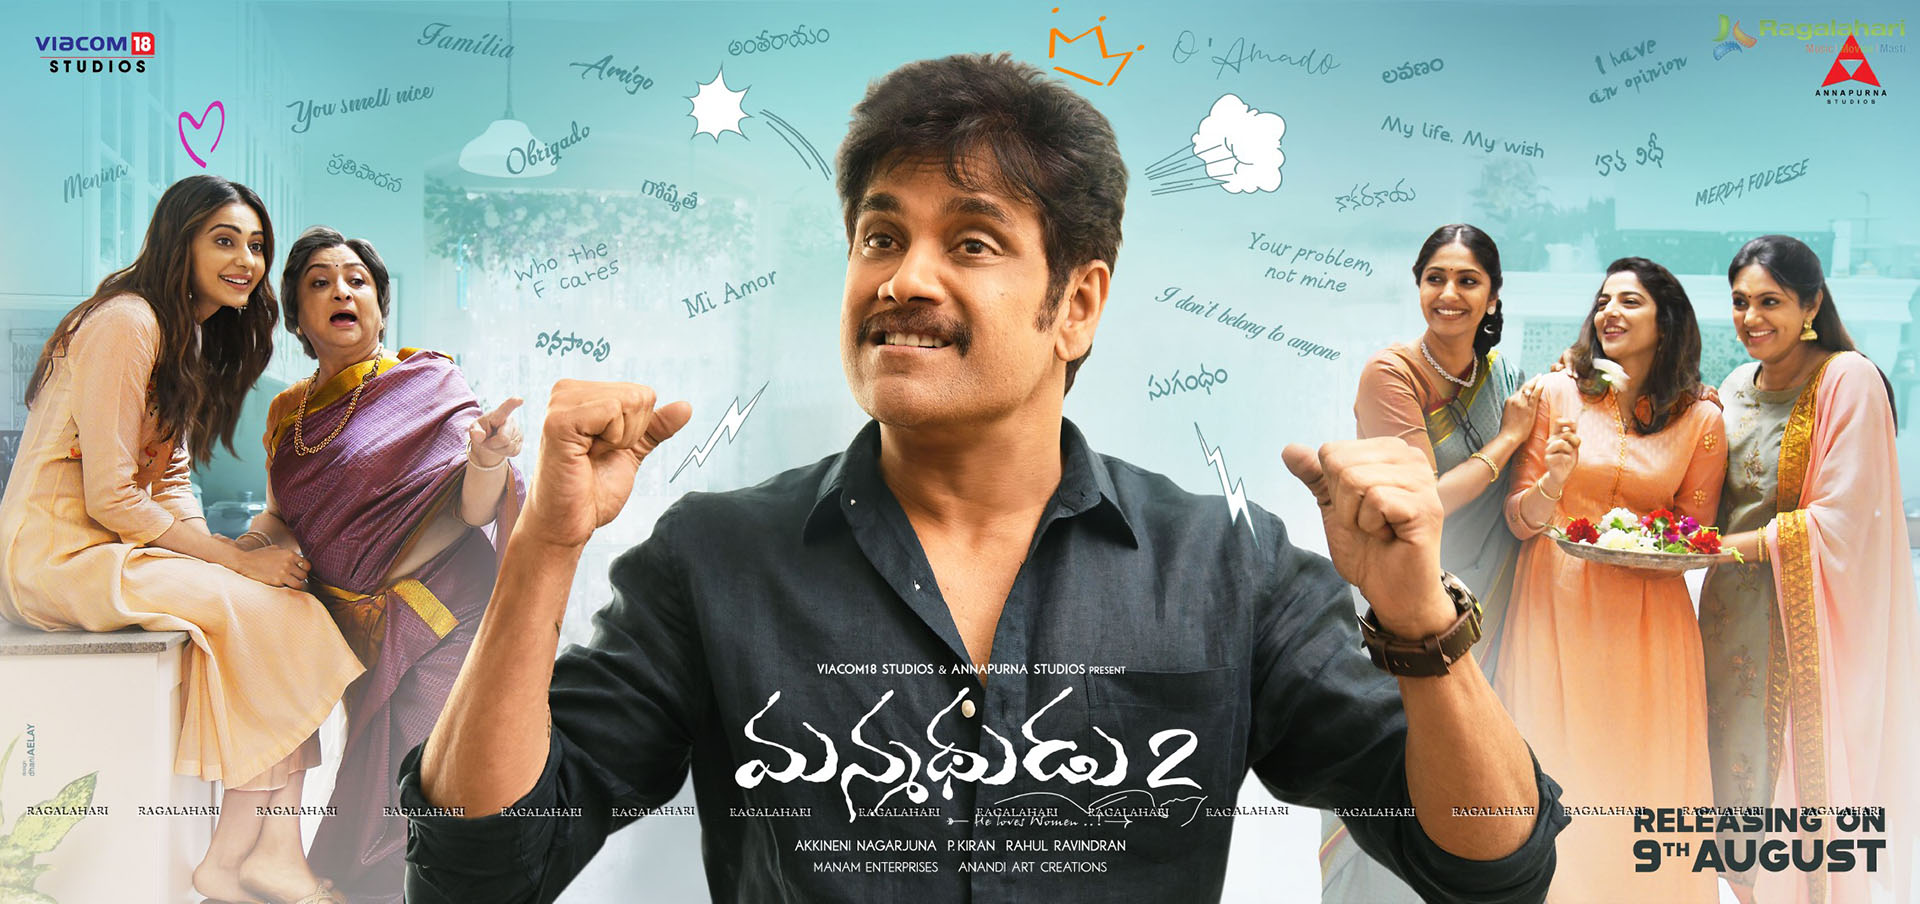 Manmadhudu 2 August 9th release date Poster
